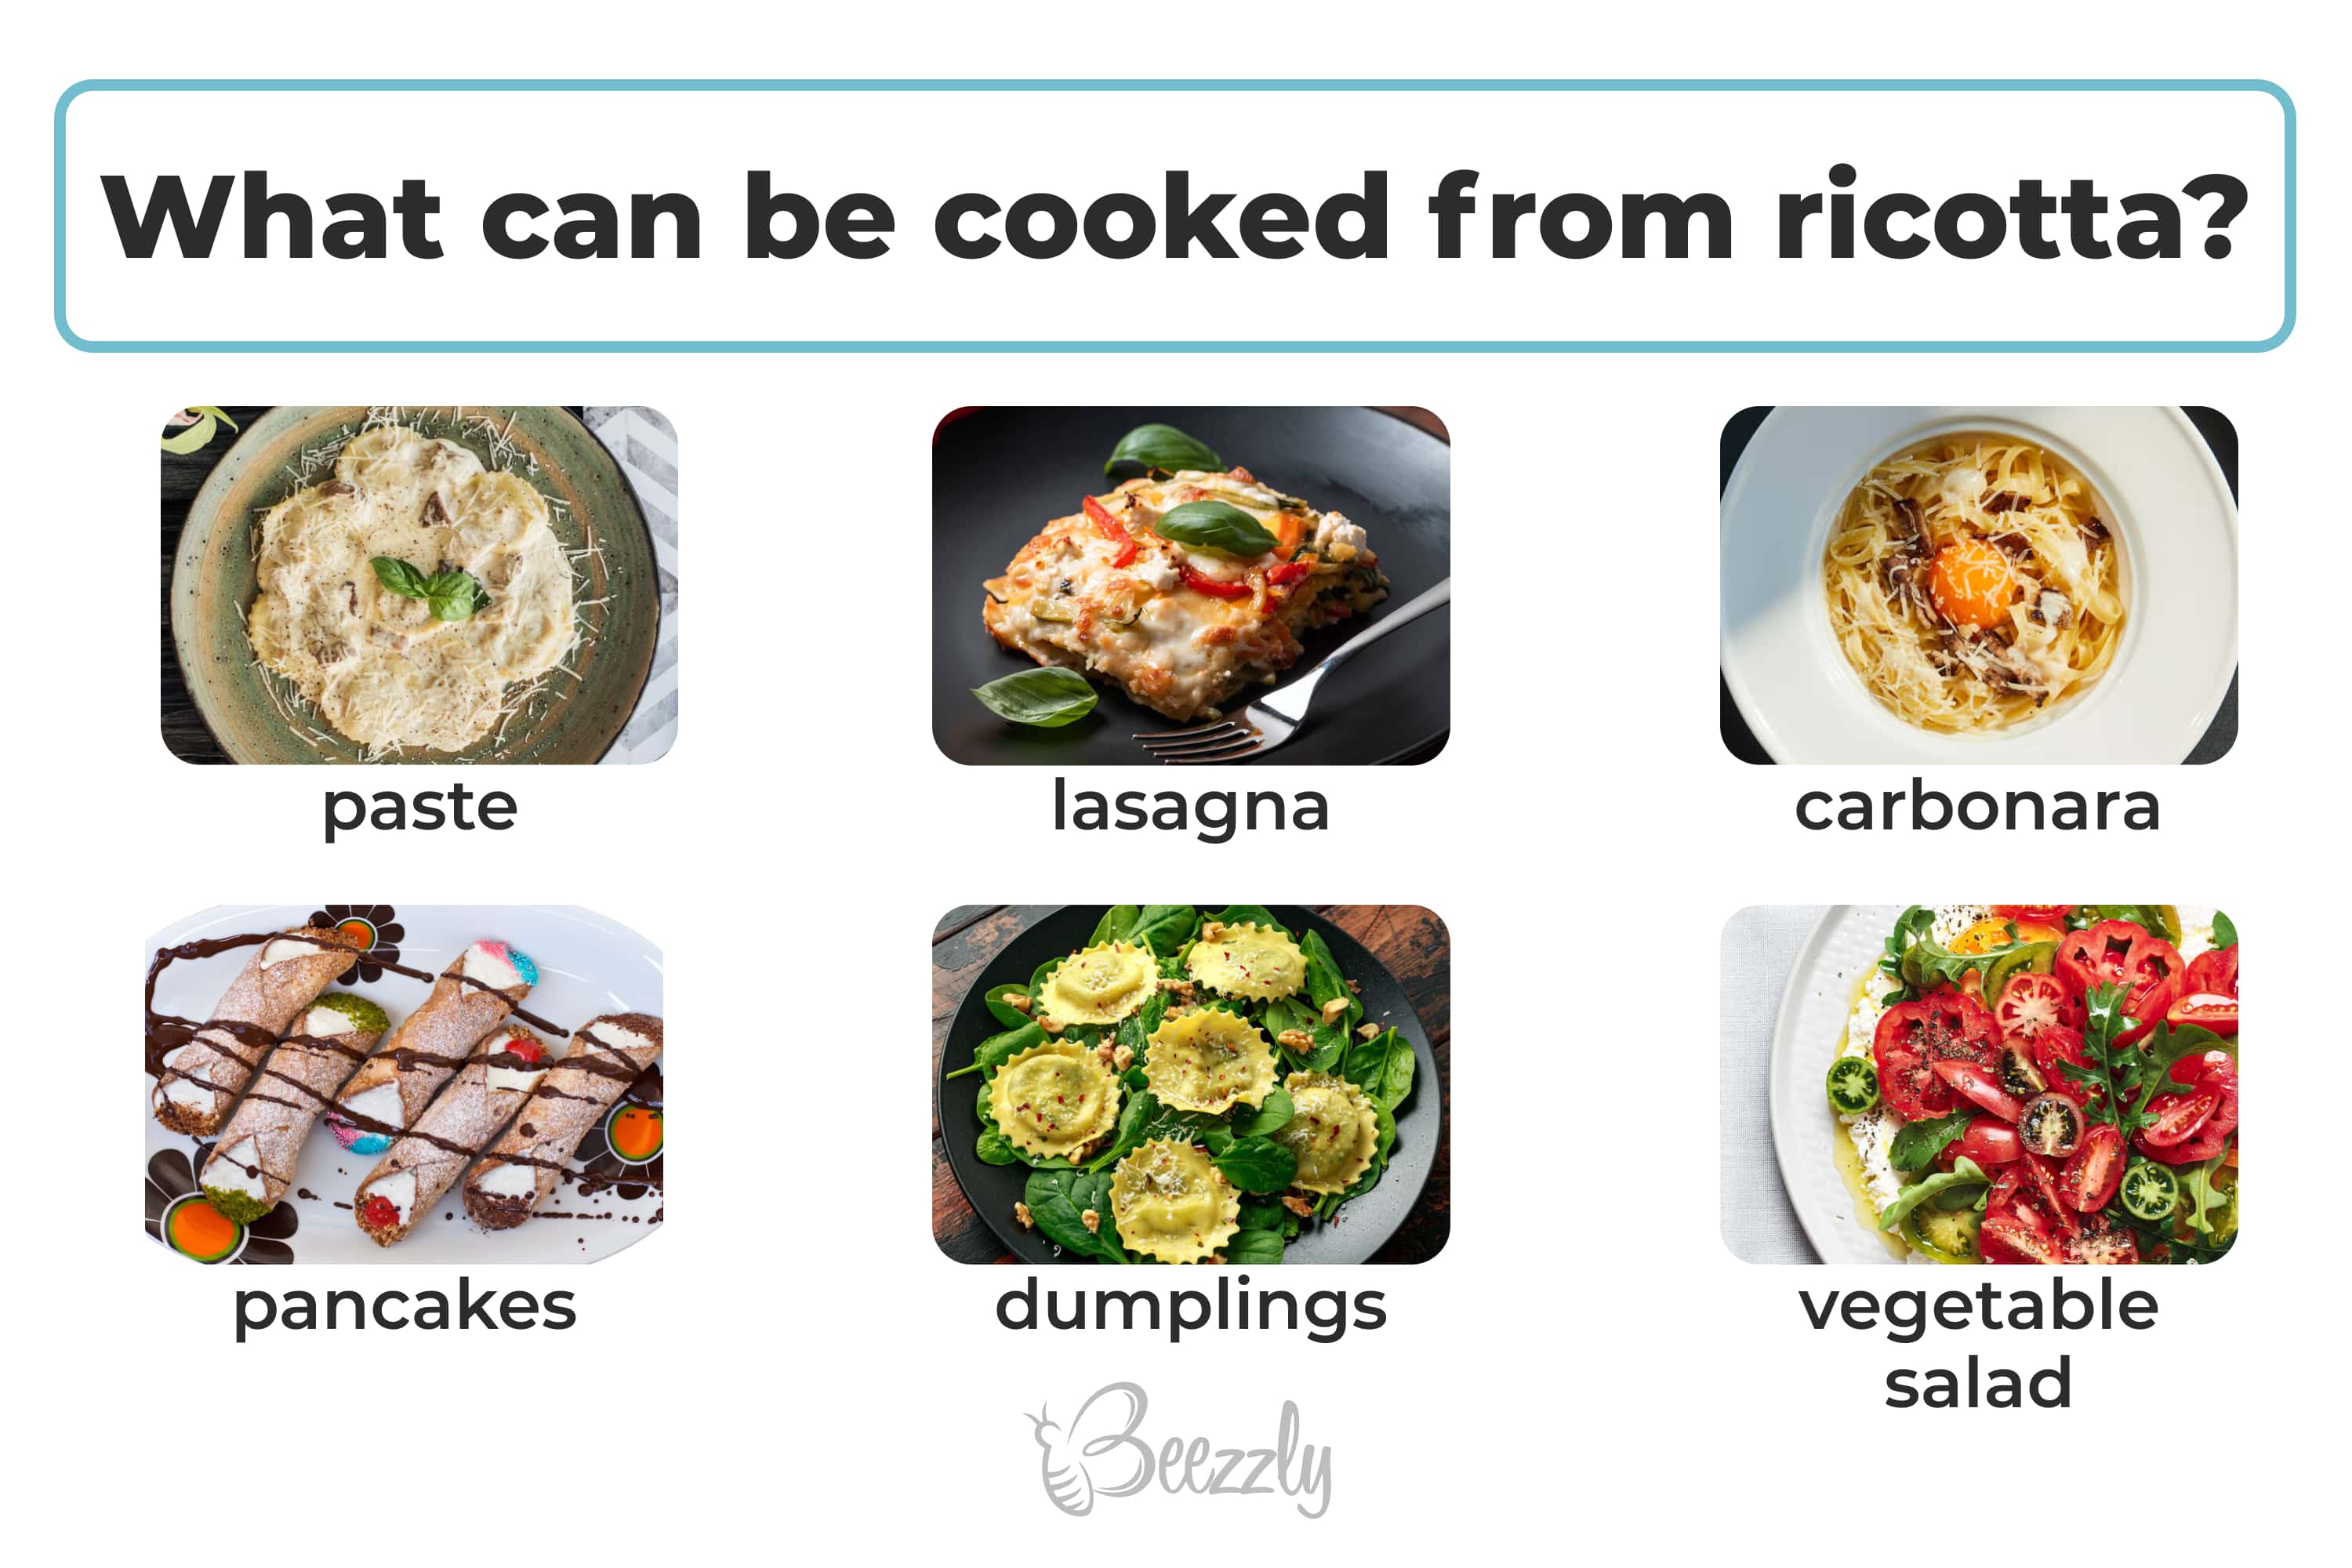 What can be cooked from ricotta